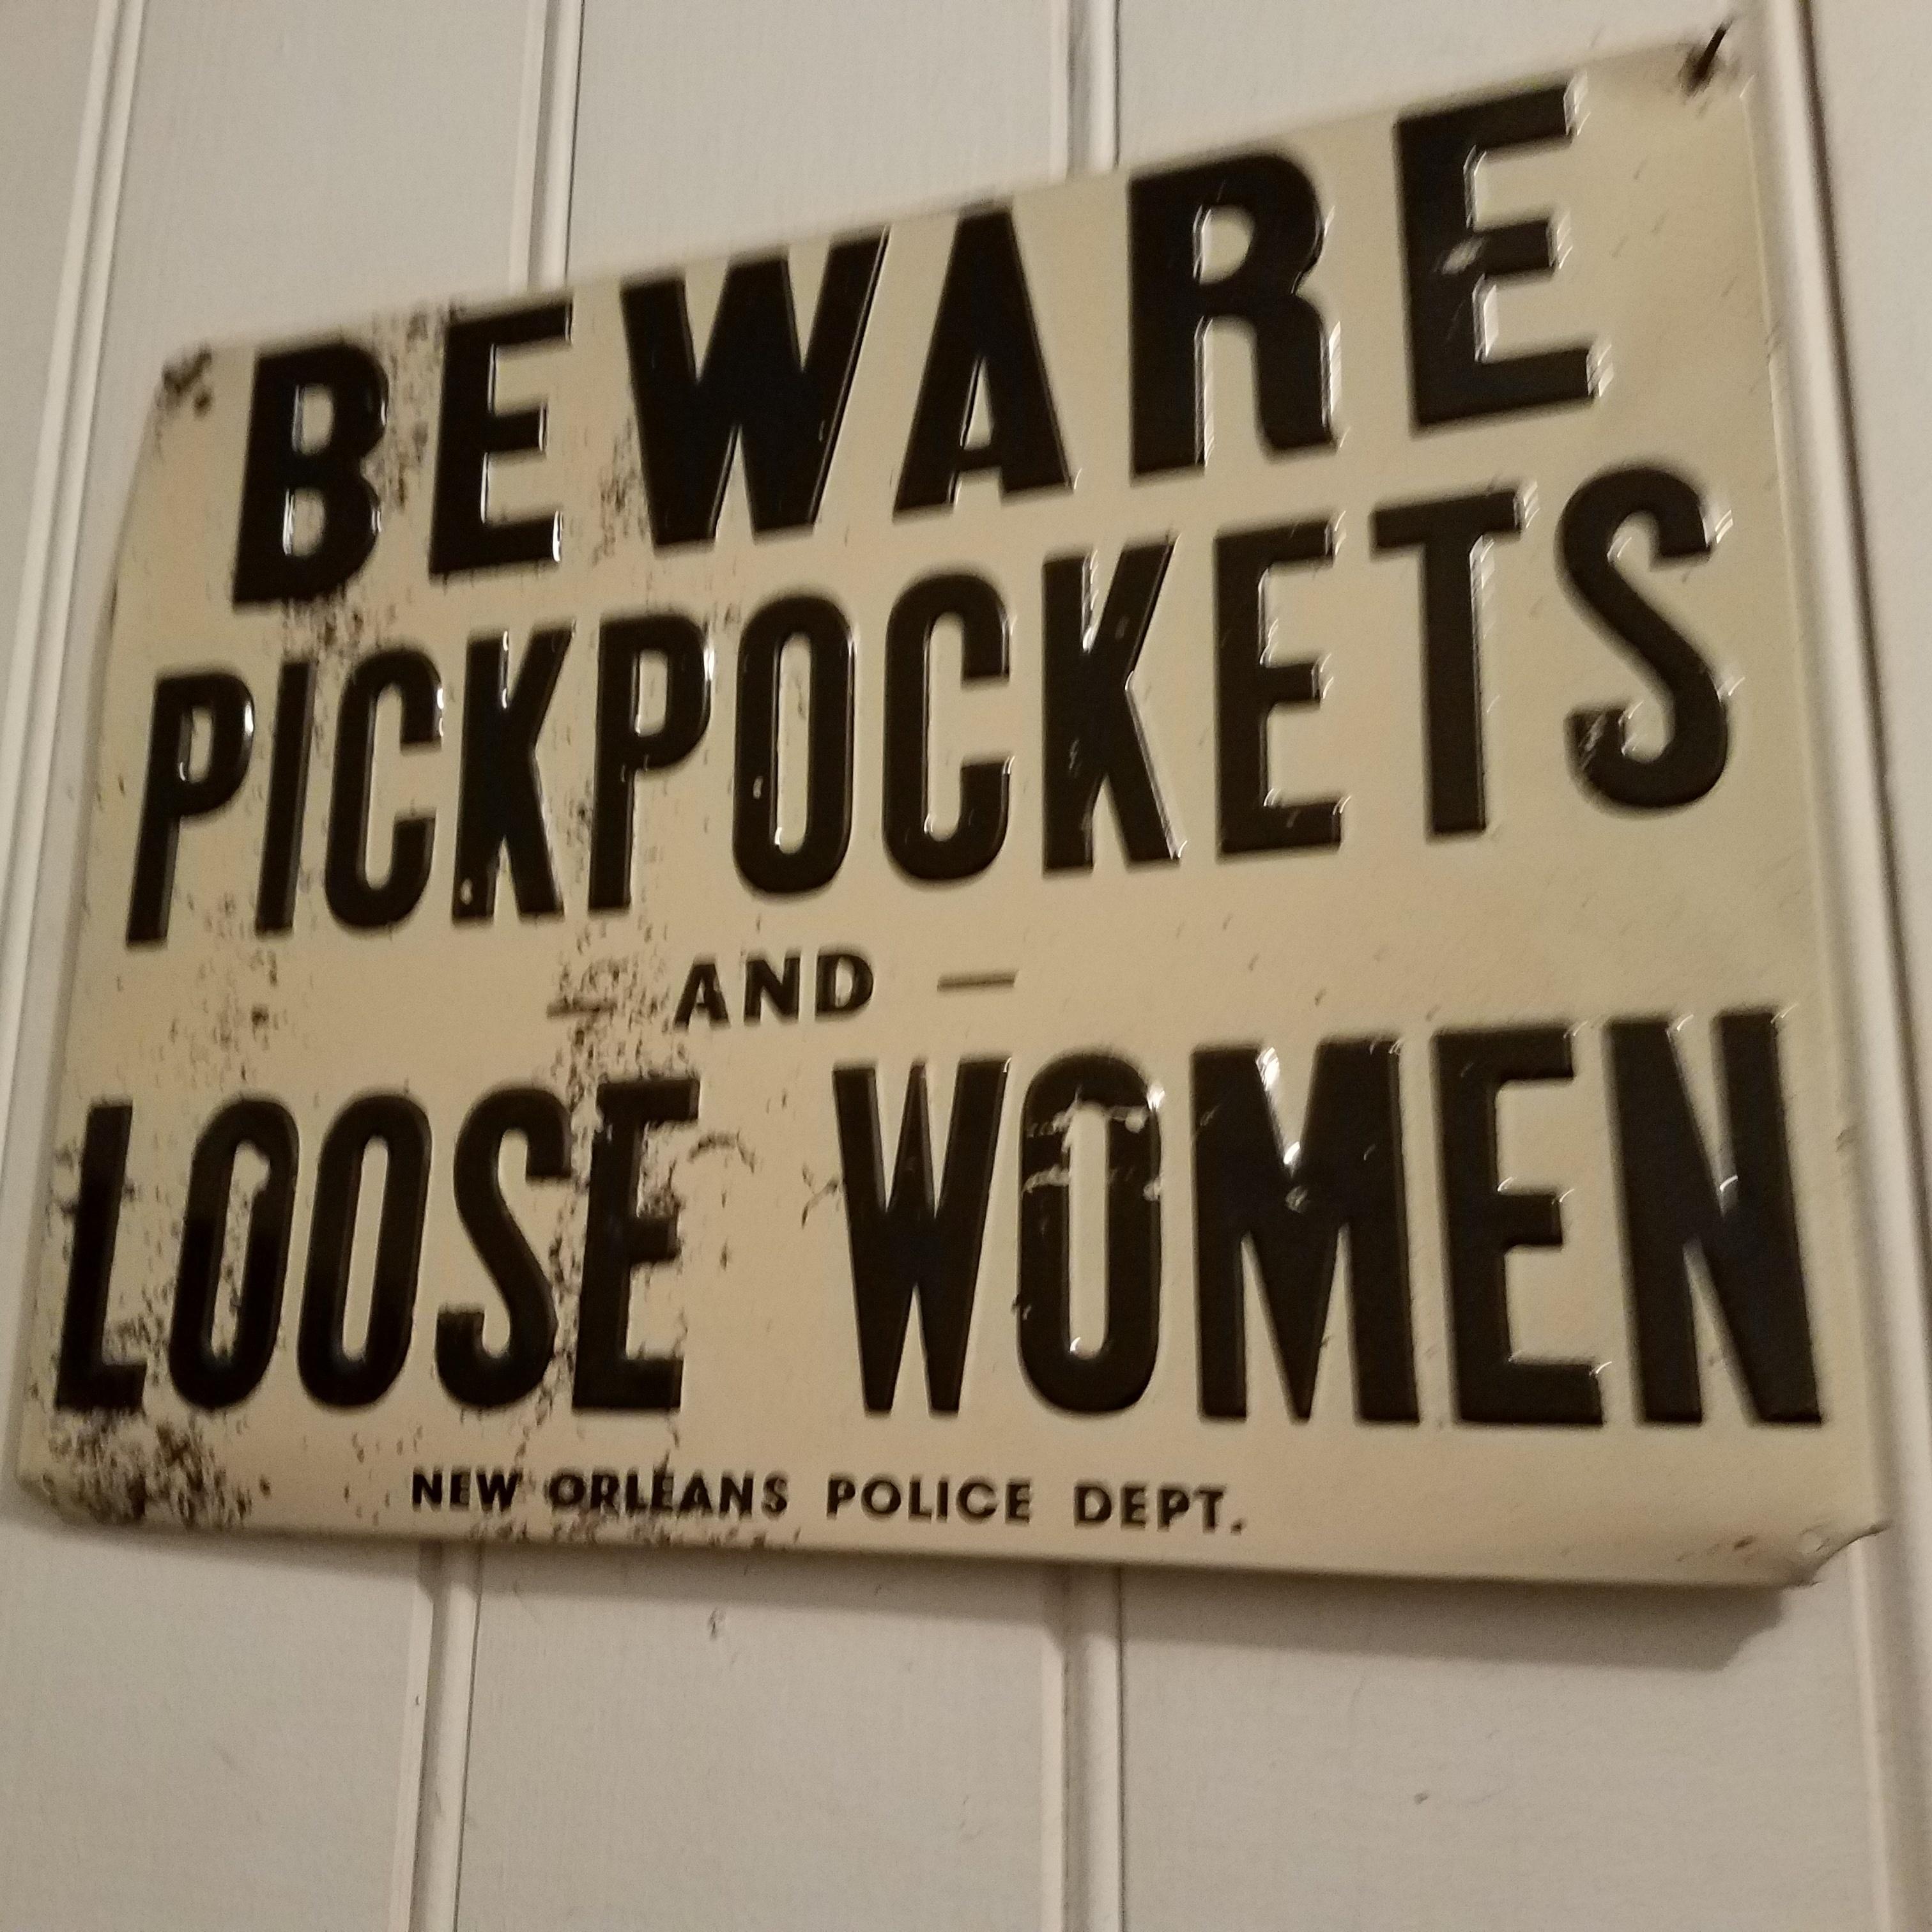 street sign - "Beware Pckpockets And Loose Women New Orleans Police Dept.